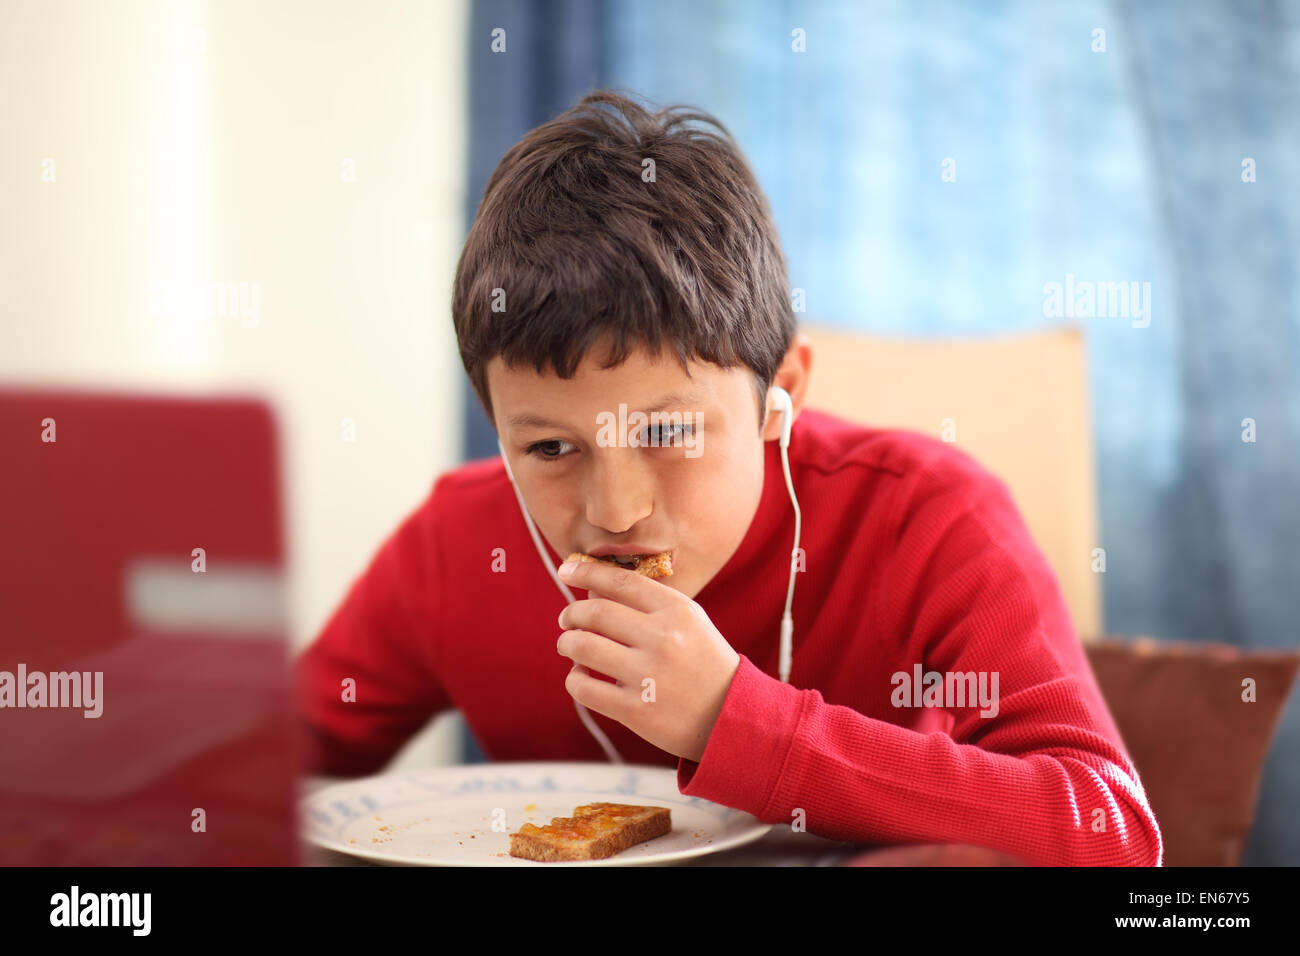 Young boy eating breakfast toast - shallow depth of field Stock Photo